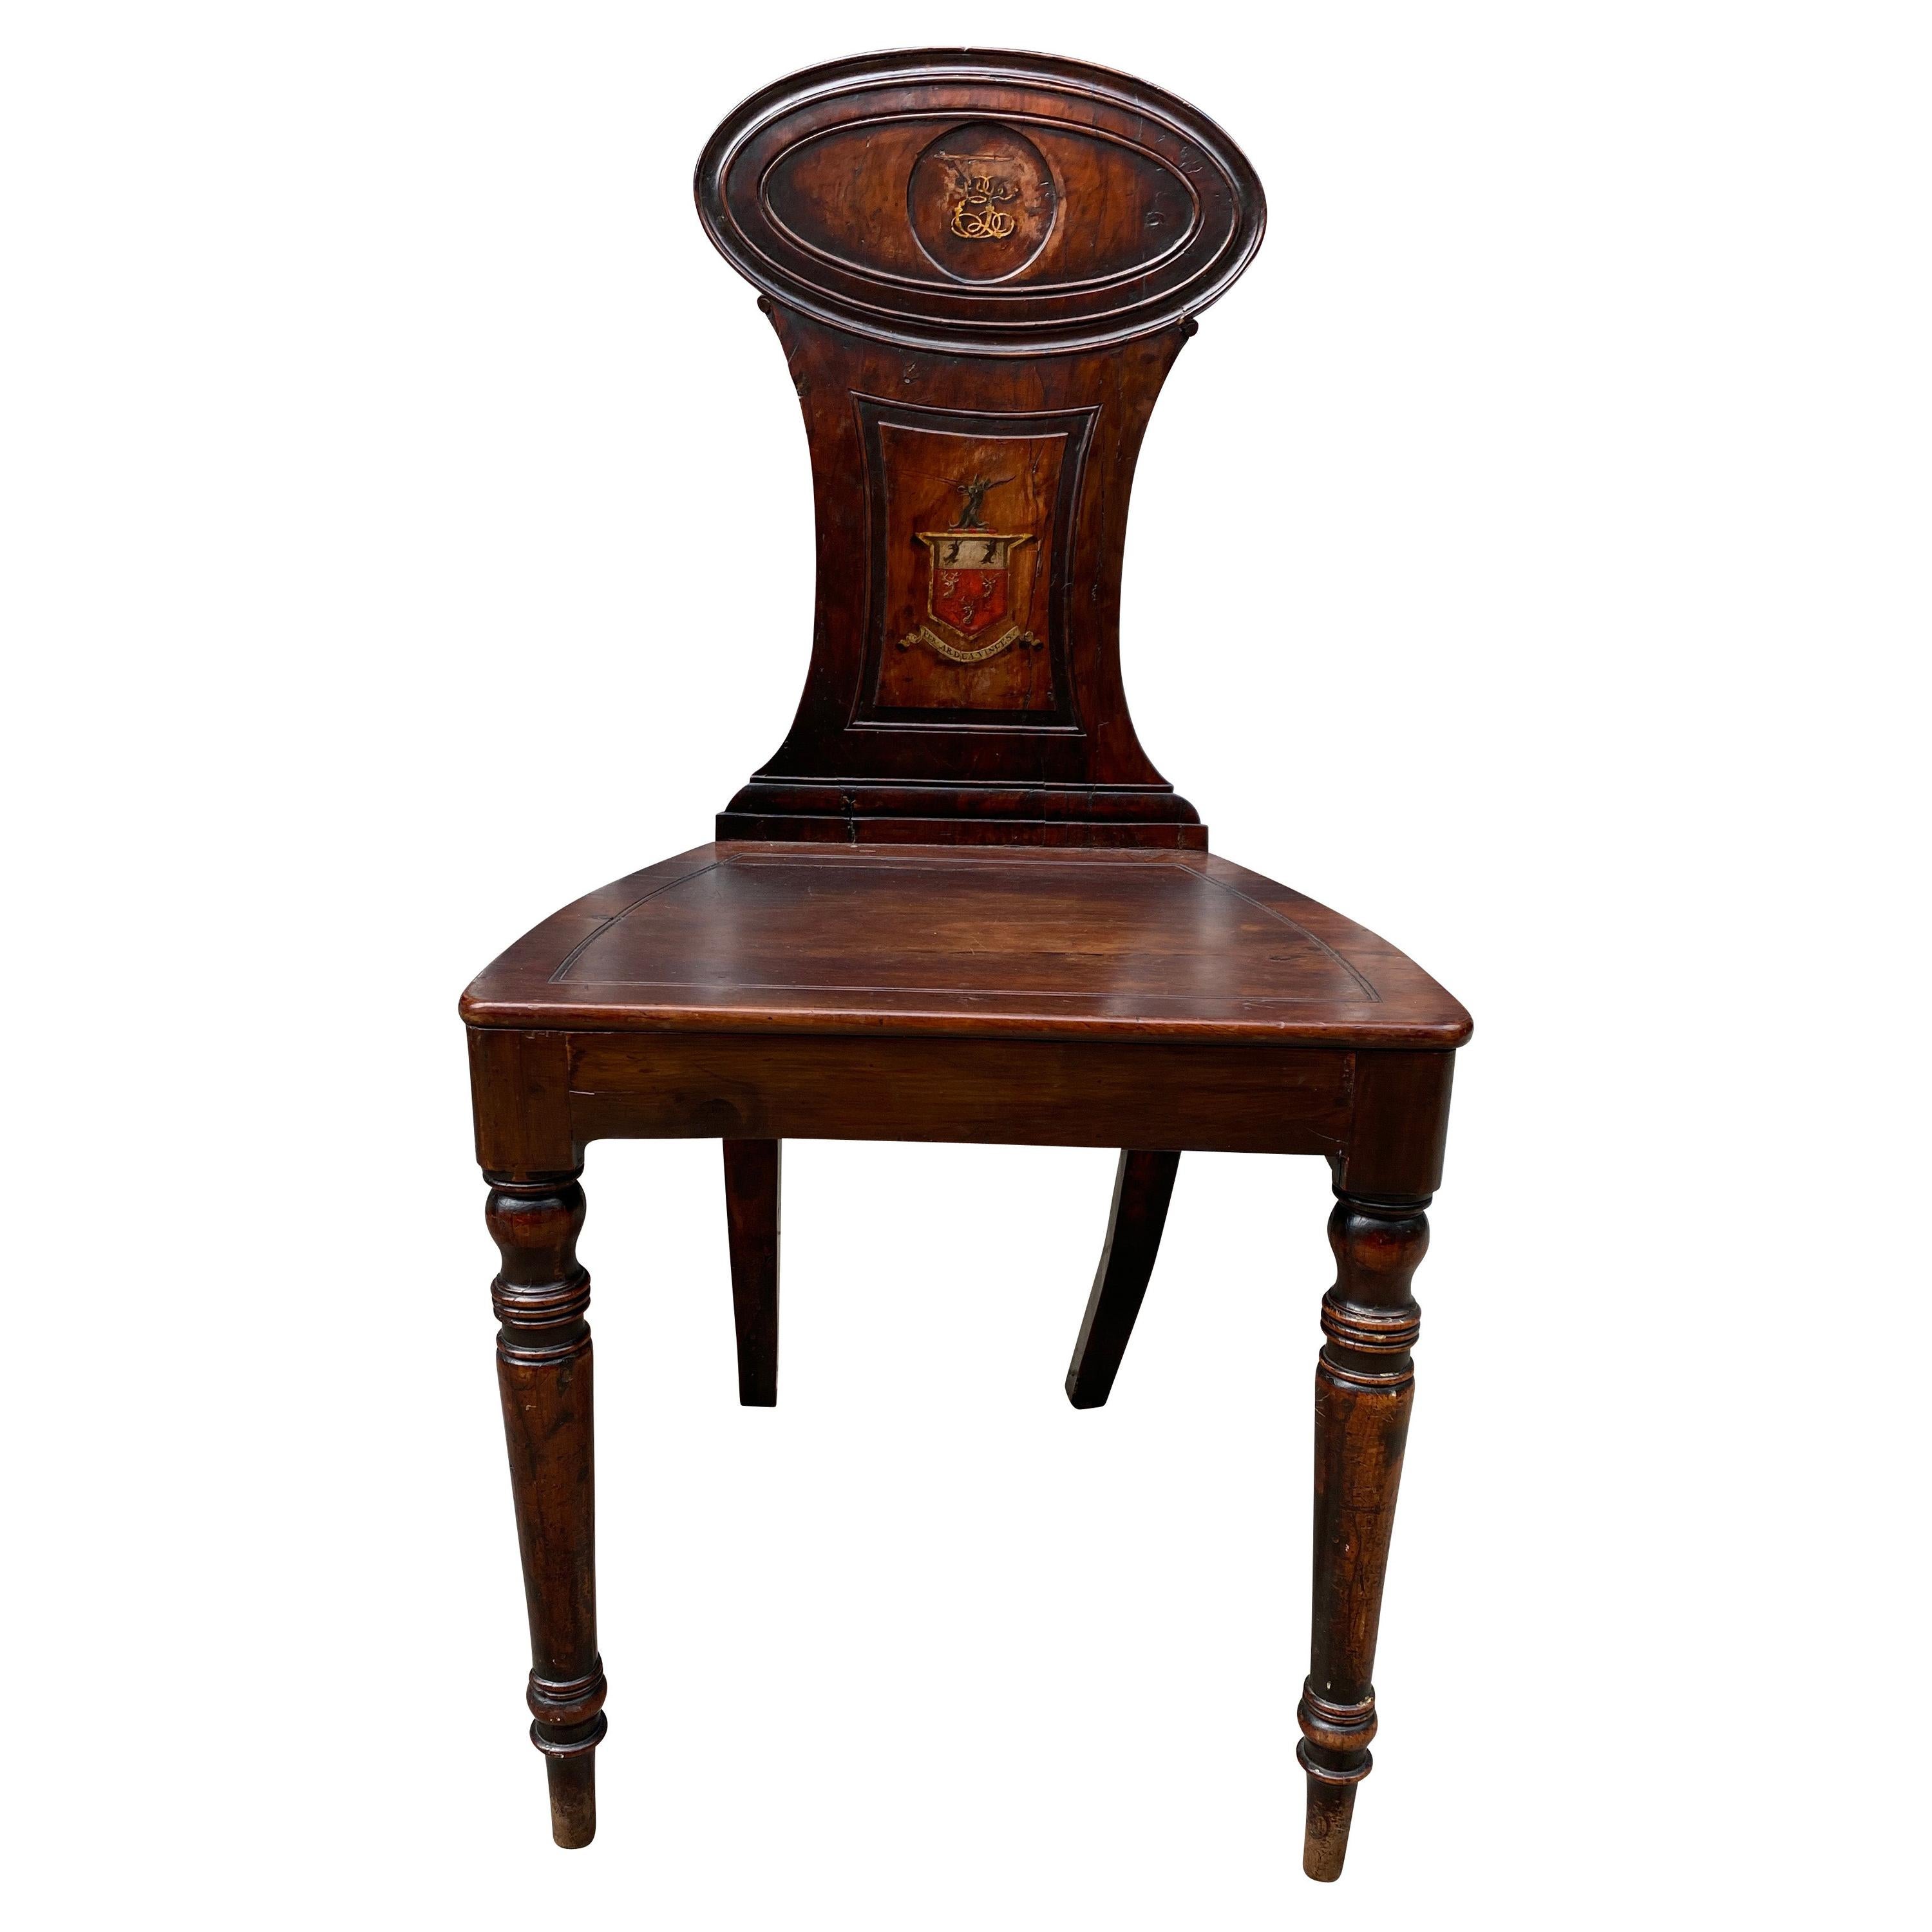 Regency Mahogany Hall Chair with Armorial Crest